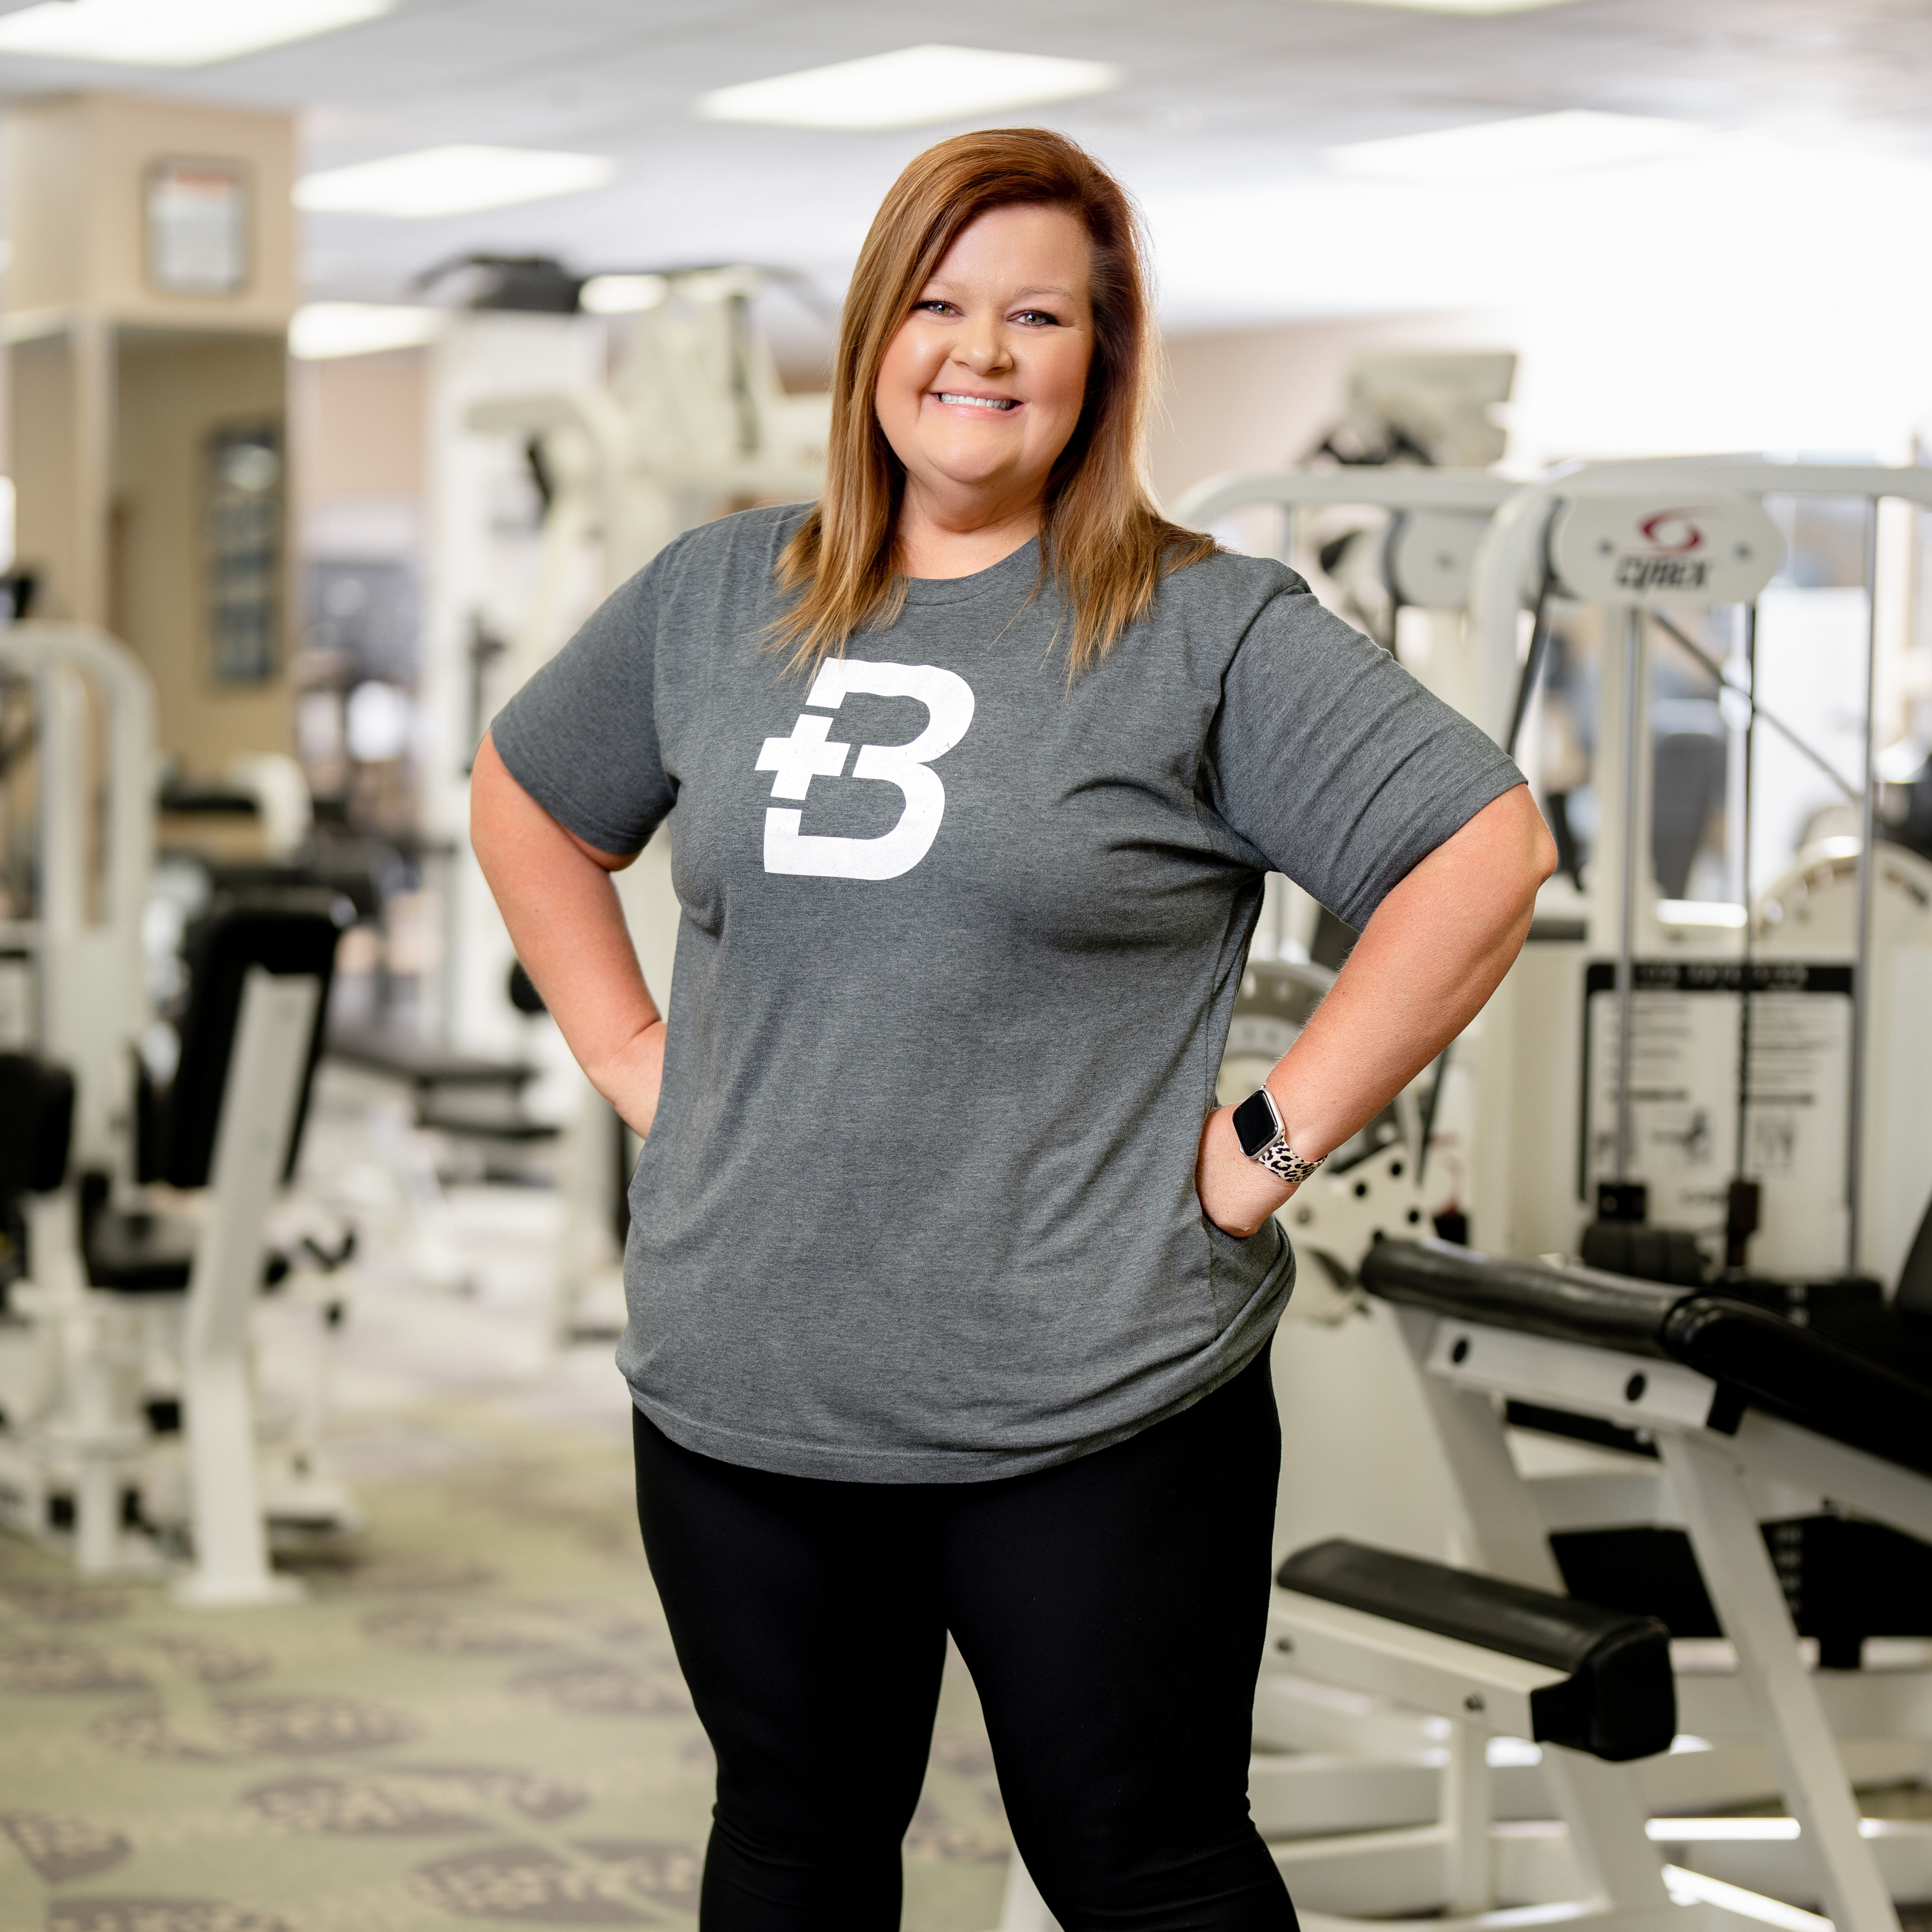 The Weight Is Over: Shannah O'Dell's Journey From Nurse Director to Weight- Loss Inspiration